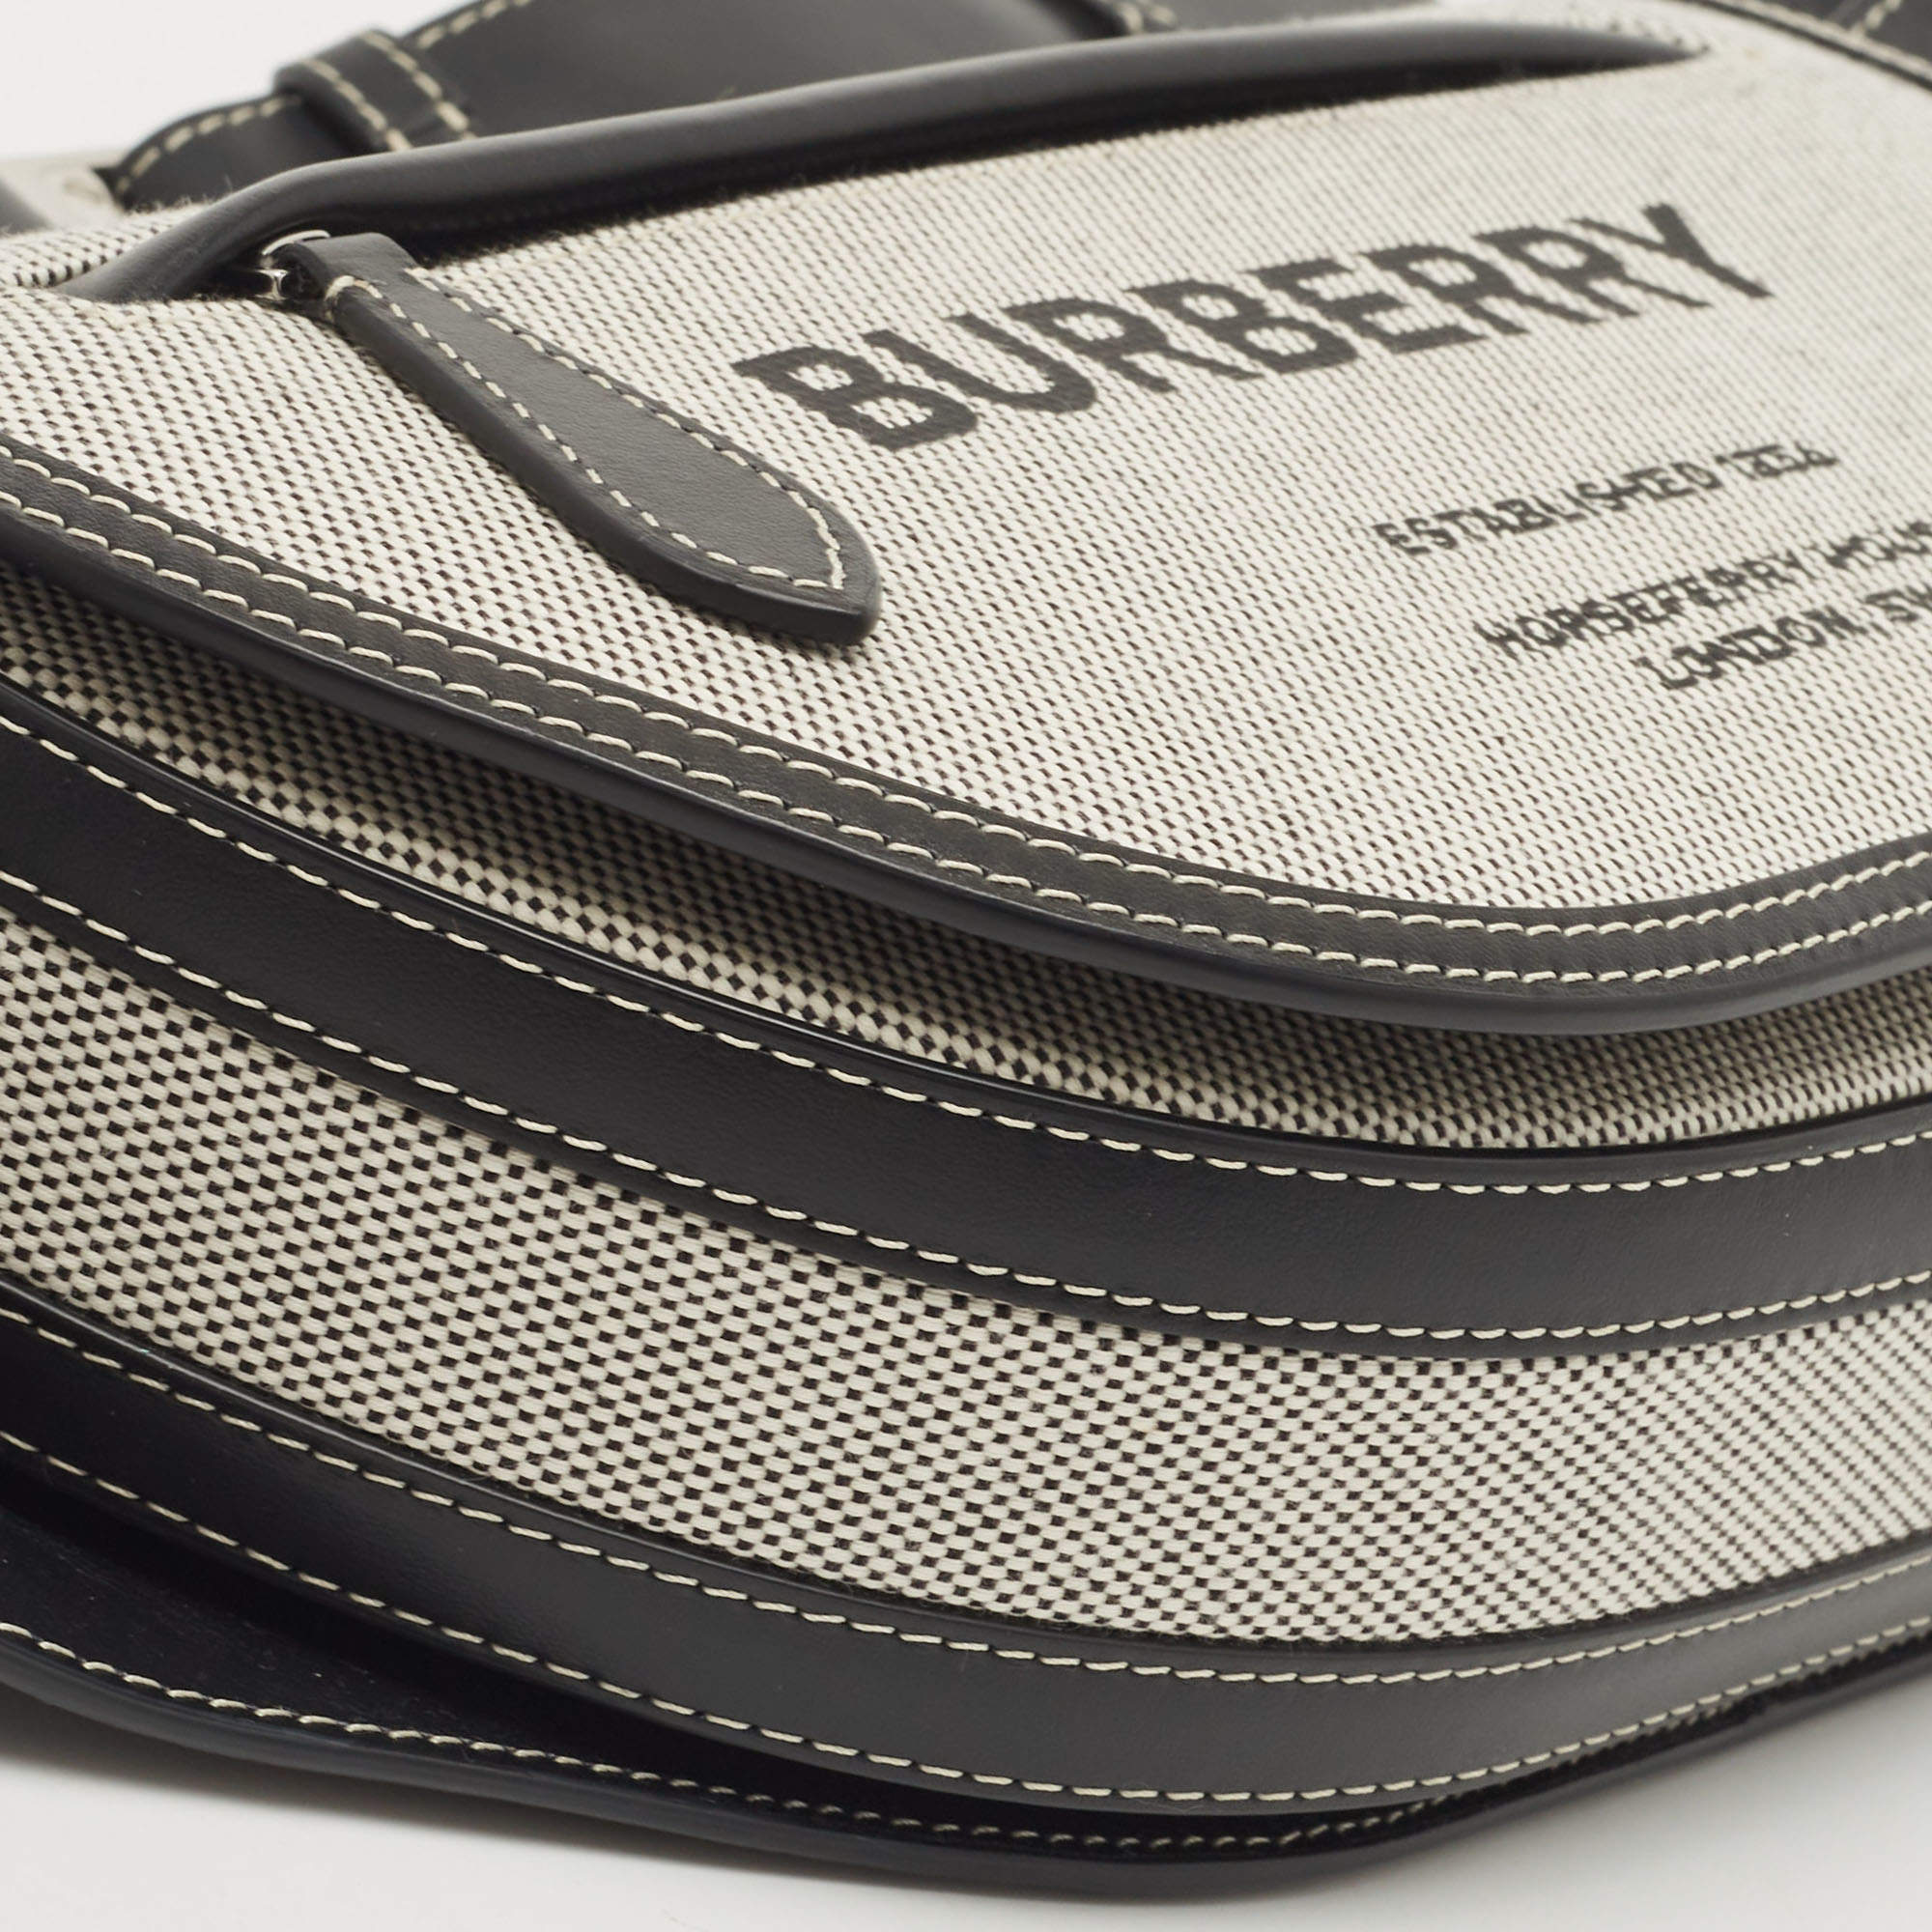 Burberry Black/Grey Canvas and Leather Small Olympia Belt Bag